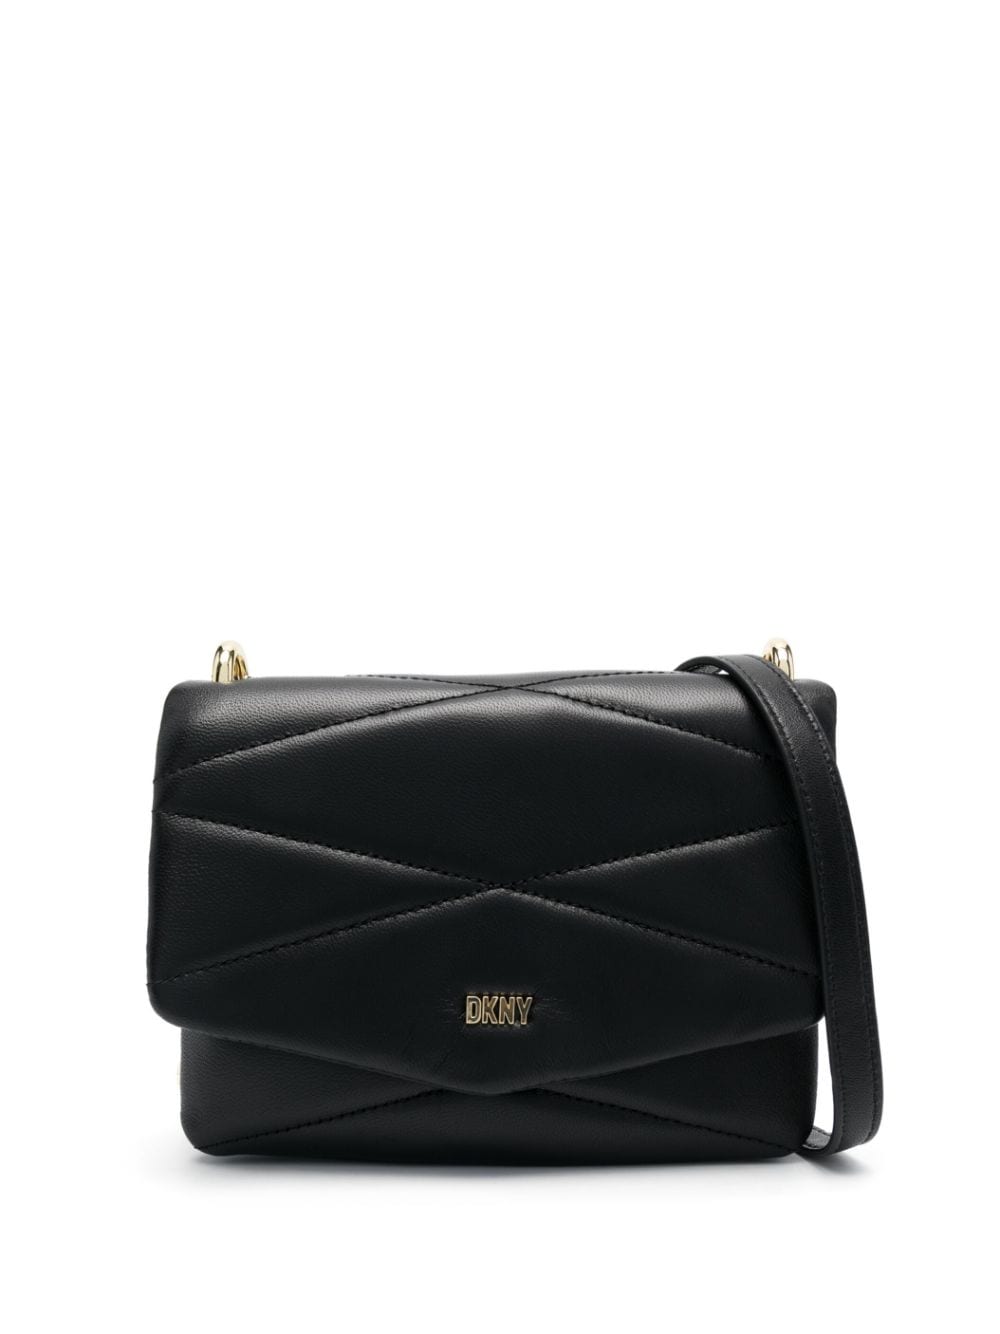 DKNY quilted leather crossbody bag - Black von DKNY